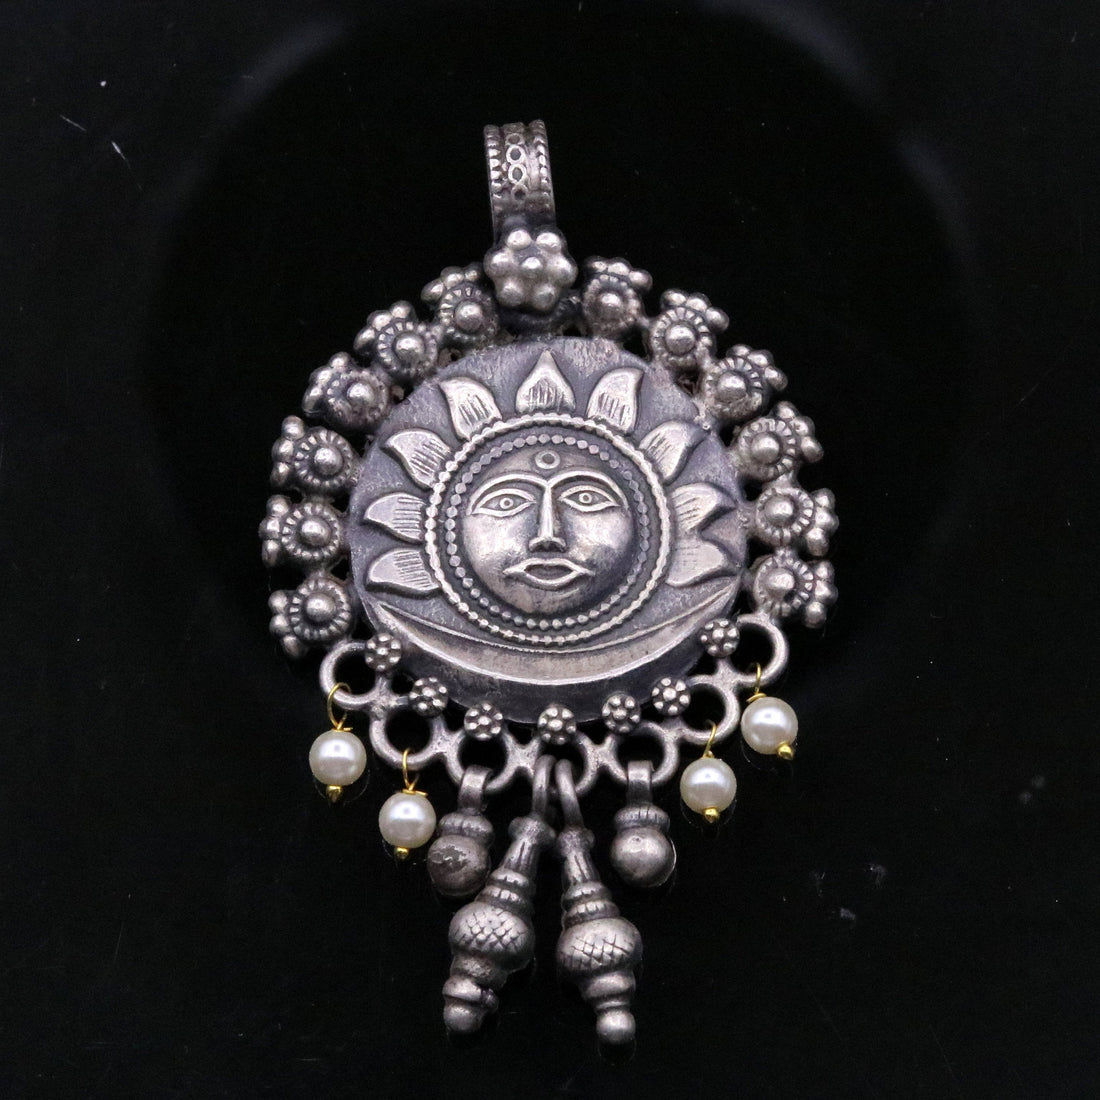 925 sterling silver handmade excellent sun face pendant with hangings, excellent tribal belly dance jewelry from Rajasthan India nsp288 - TRIBAL ORNAMENTS